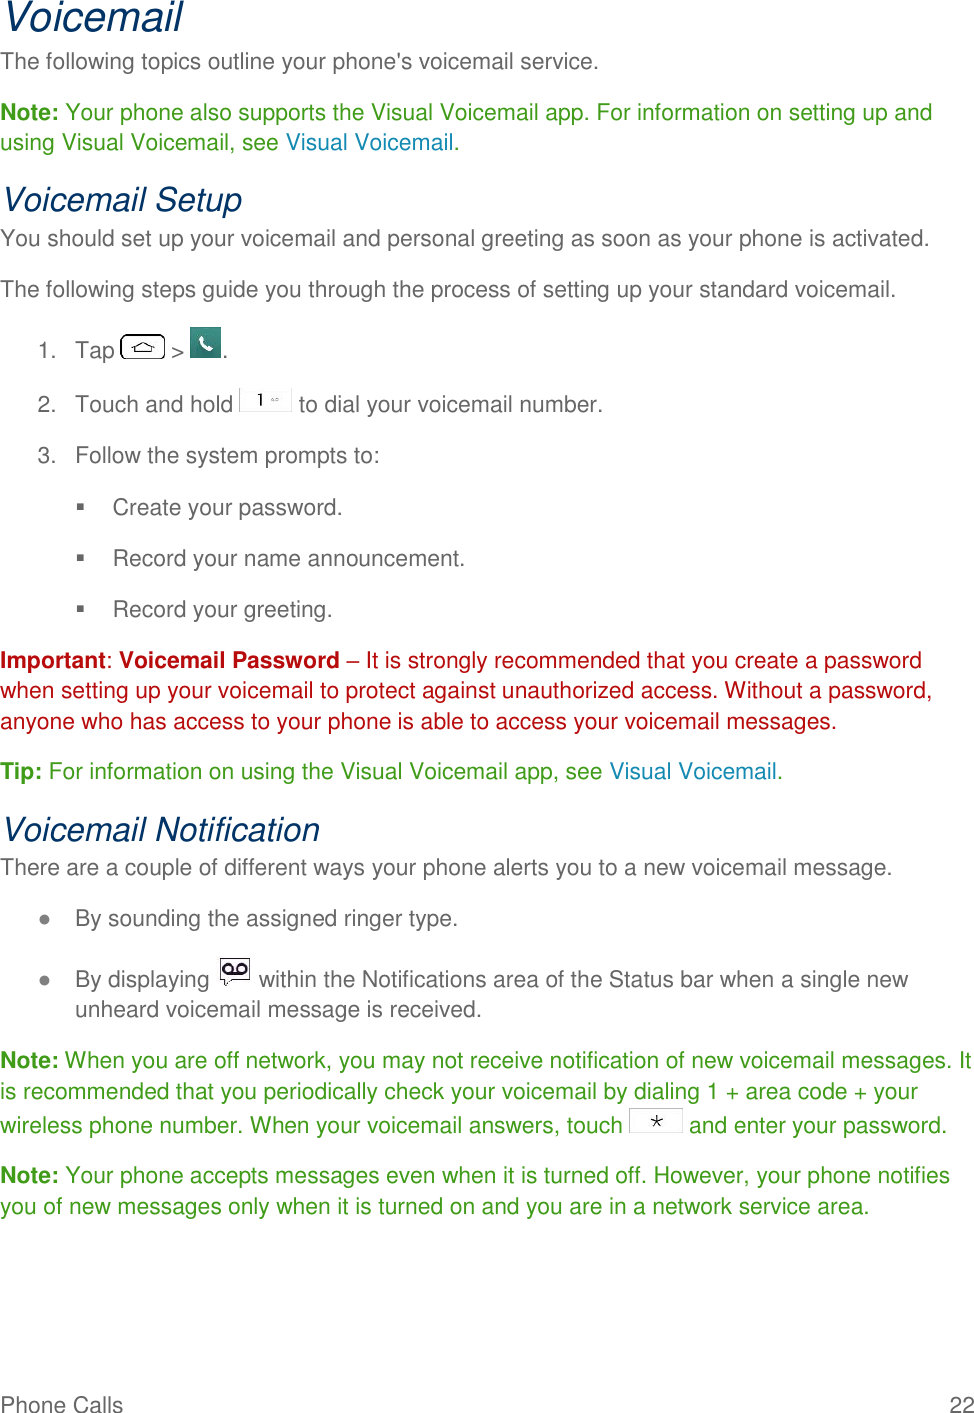 Phone Calls  22 Voicemail The following topics outline your phone&apos;s voicemail service. Note: Your phone also supports the Visual Voicemail app. For information on setting up and using Visual Voicemail, see Visual Voicemail. Voicemail Setup You should set up your voicemail and personal greeting as soon as your phone is activated.  The following steps guide you through the process of setting up your standard voicemail.  1.  Tap   &gt;  . 2.  Touch and hold   to dial your voicemail number.  3.  Follow the system prompts to:    Create your password.    Record your name announcement.    Record your greeting.  Important: Voicemail Password – It is strongly recommended that you create a password when setting up your voicemail to protect against unauthorized access. Without a password, anyone who has access to your phone is able to access your voicemail messages. Tip: For information on using the Visual Voicemail app, see Visual Voicemail. Voicemail Notification There are a couple of different ways your phone alerts you to a new voicemail message. ● By sounding the assigned ringer type. ● By displaying   within the Notifications area of the Status bar when a single new unheard voicemail message is received. Note: When you are off network, you may not receive notification of new voicemail messages. It is recommended that you periodically check your voicemail by dialing 1 + area code + your wireless phone number. When your voicemail answers, touch   and enter your password.  Note: Your phone accepts messages even when it is turned off. However, your phone notifies you of new messages only when it is turned on and you are in a network service area. 